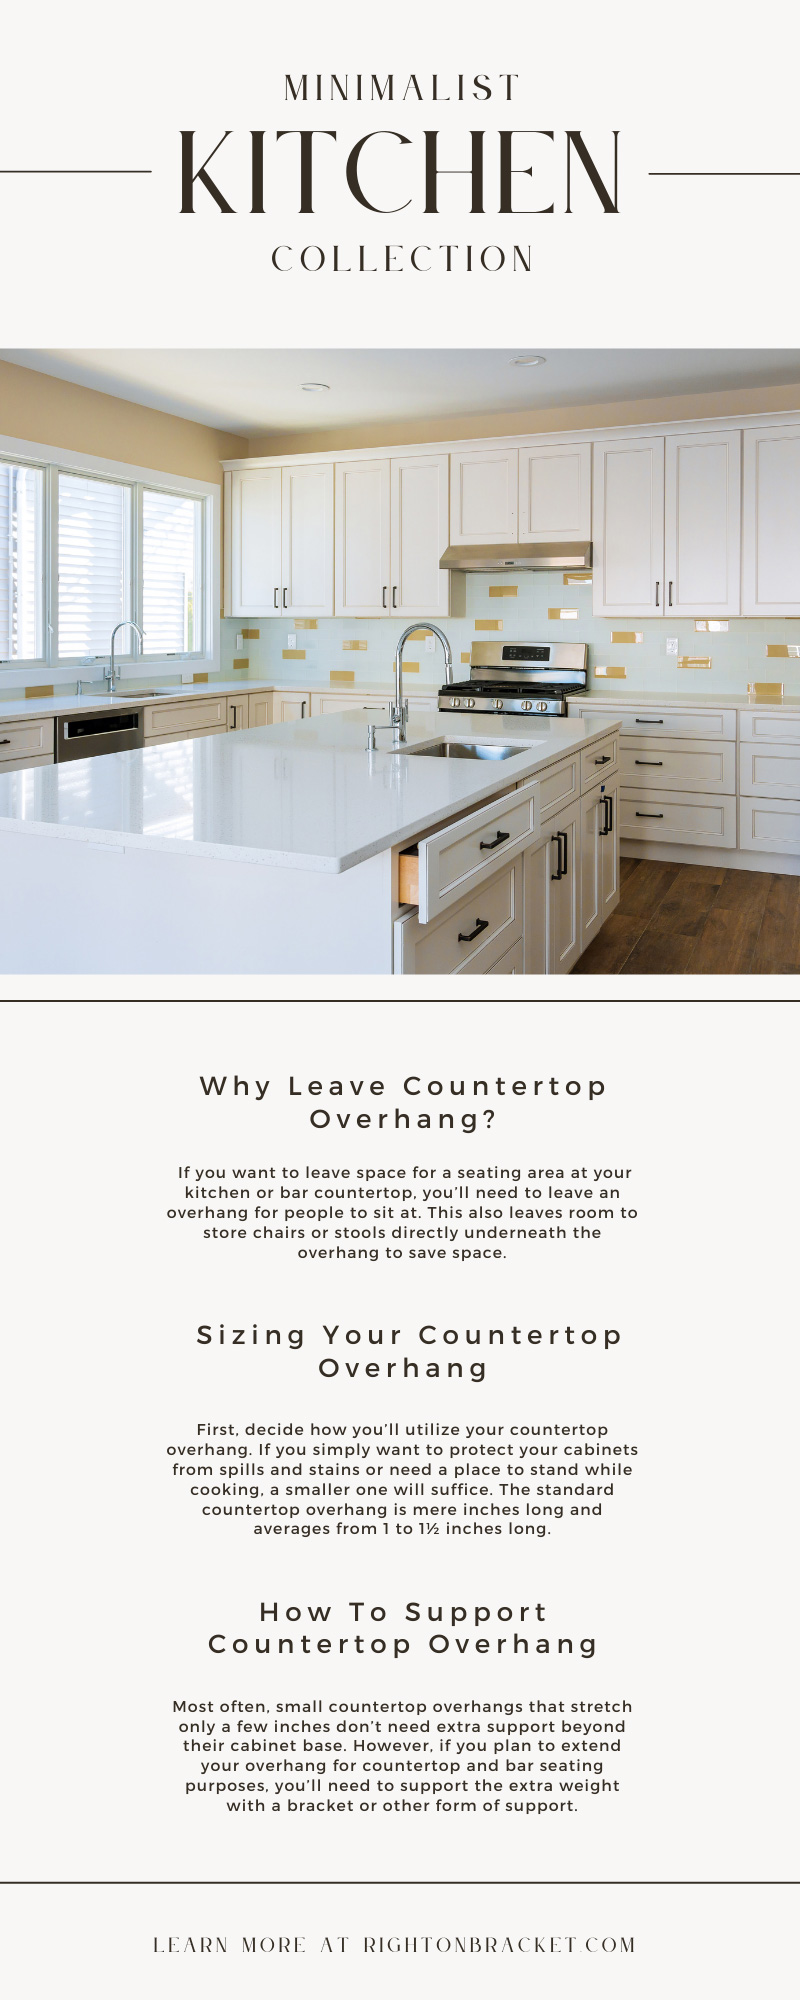 What You Should Know About Countertop Overhang
